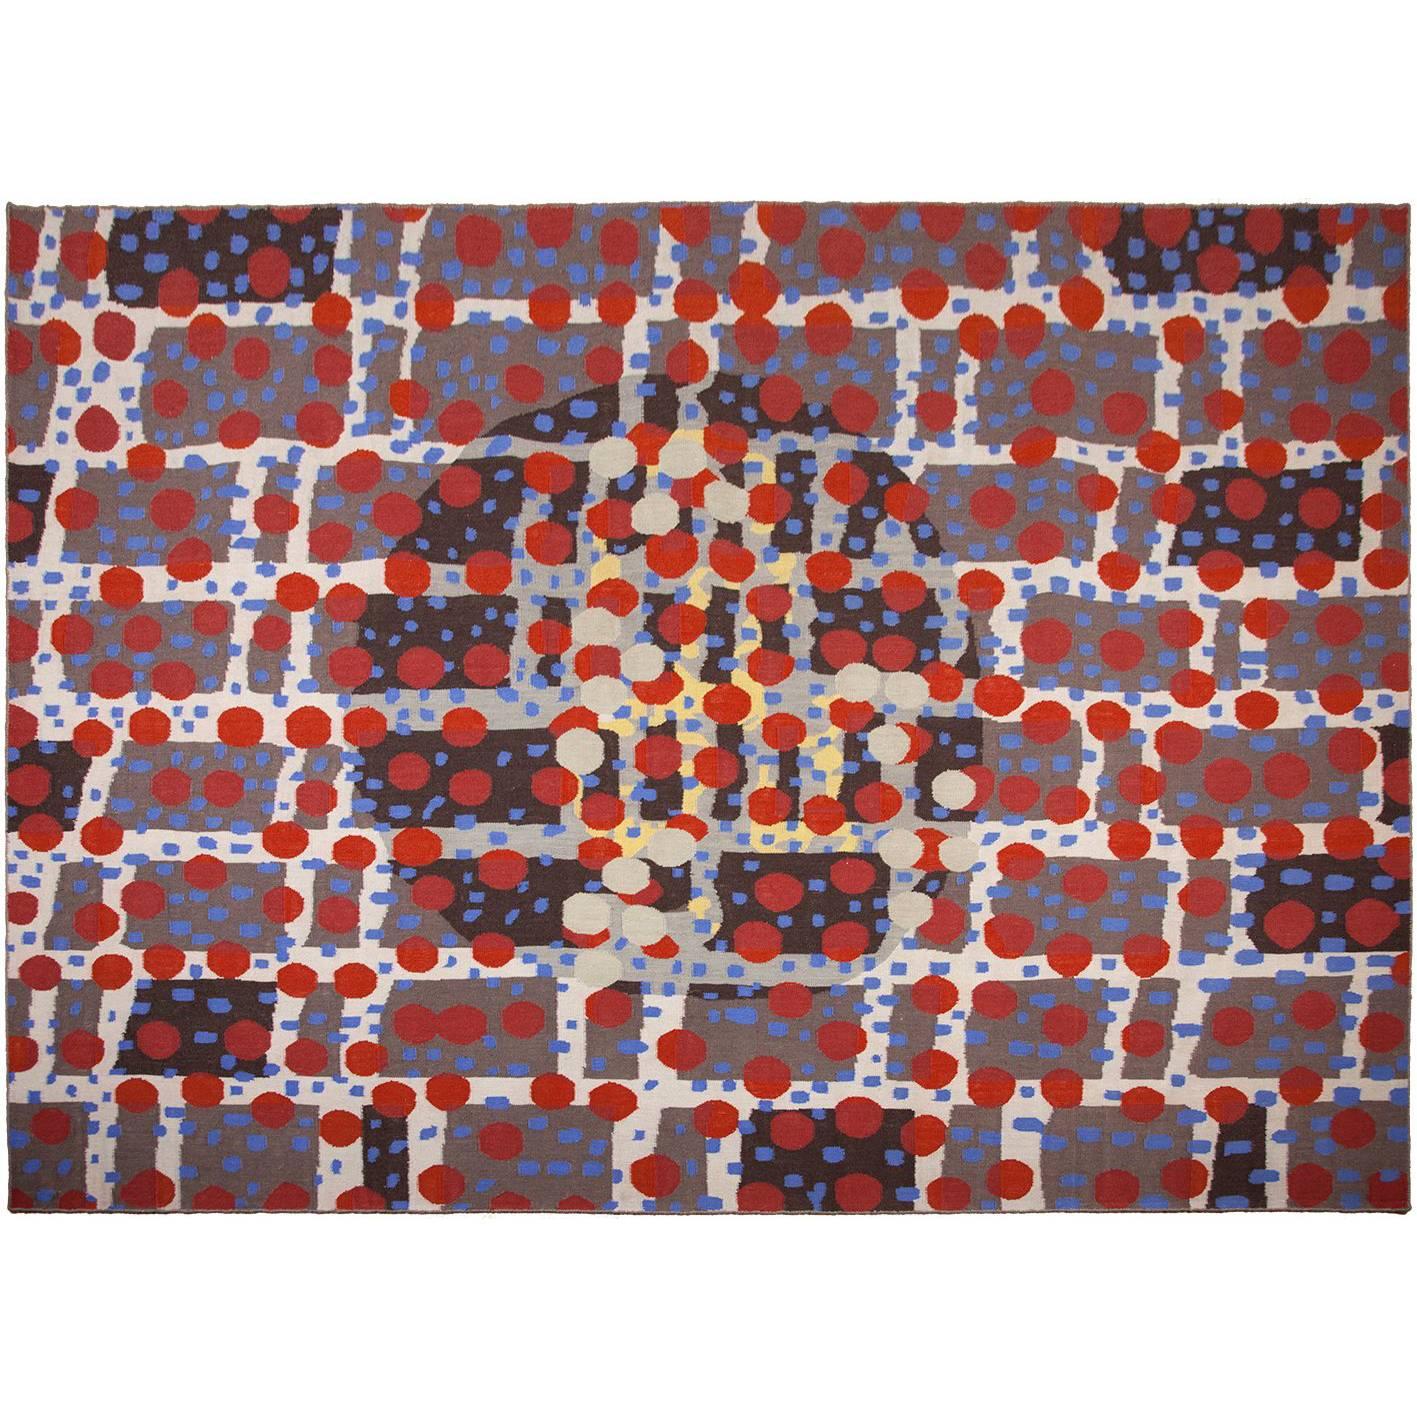 Rafa Forteza Rectangular Indian Wool Rug Grey, Black, Blue, and red ´Fluctus C´ For Sale